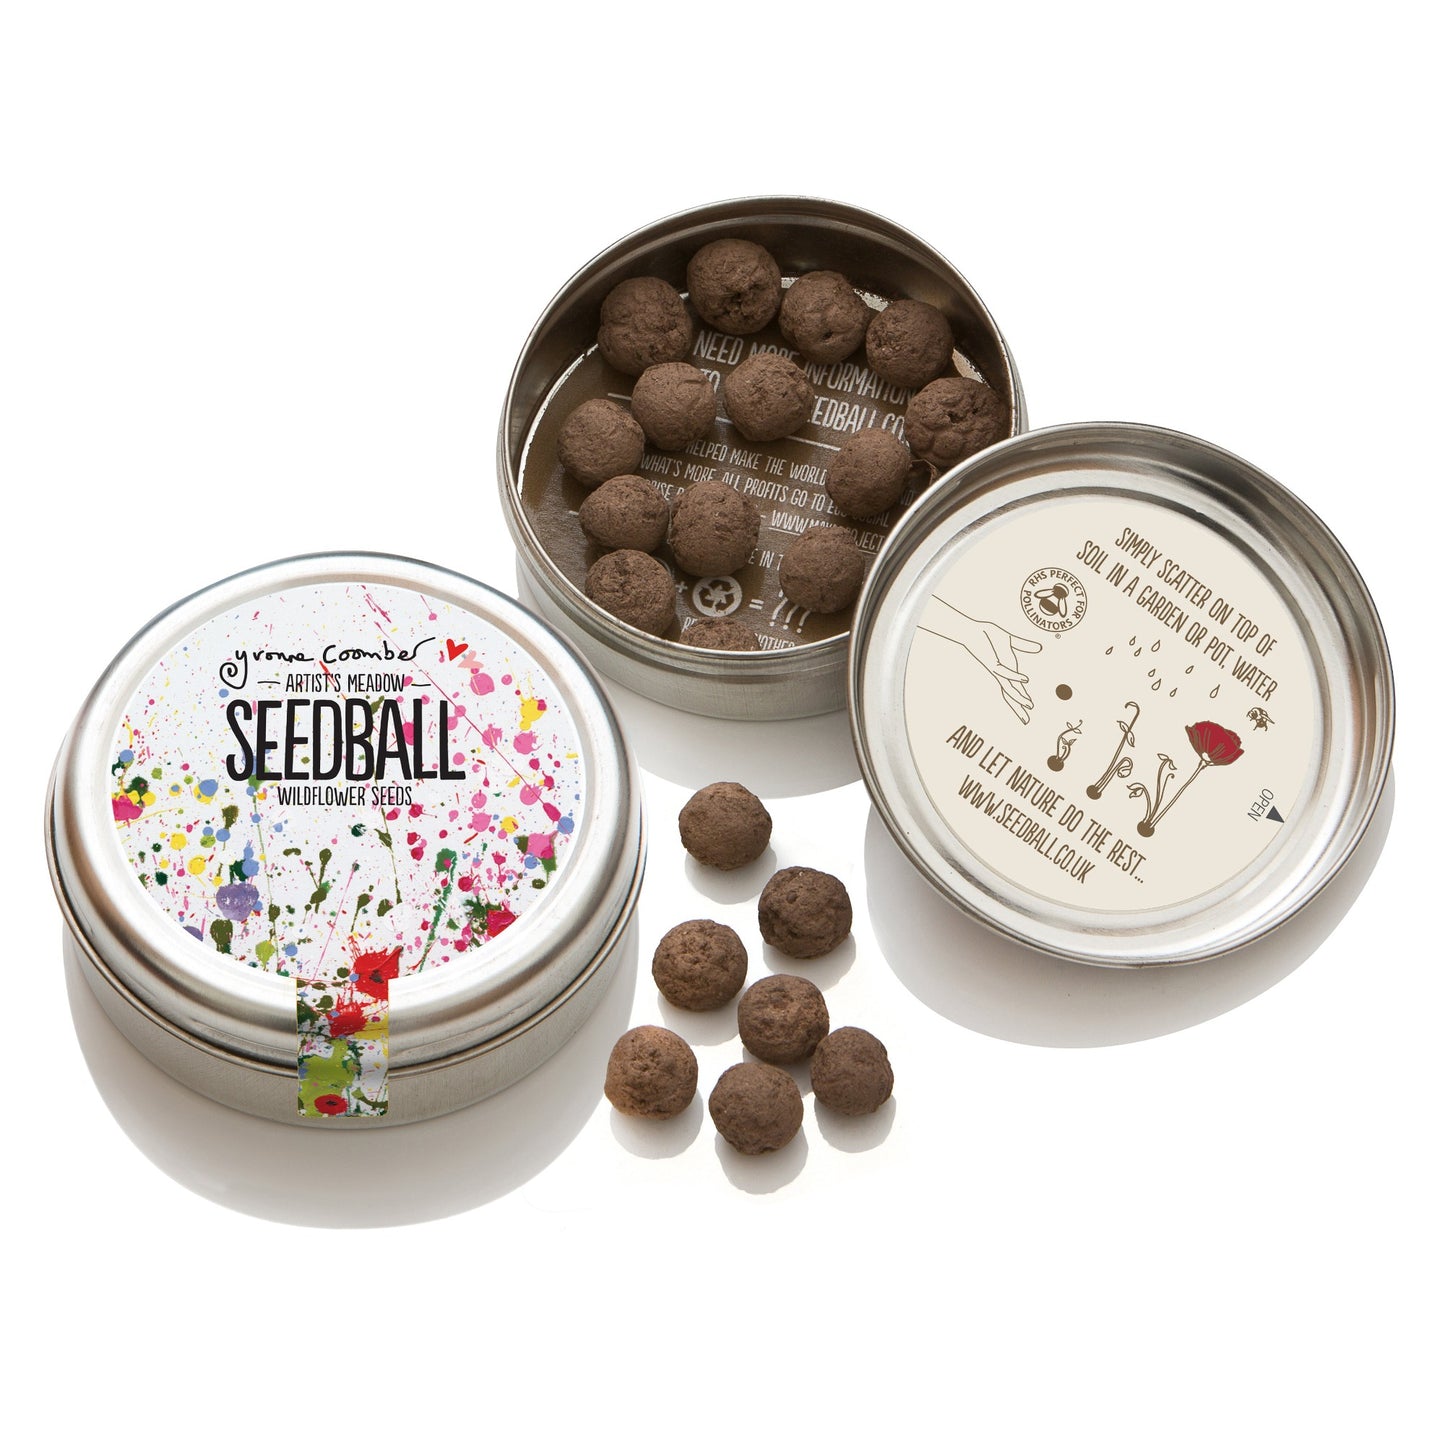 yvonne coombers artist meadow seedball wildflower seeds available from beevive